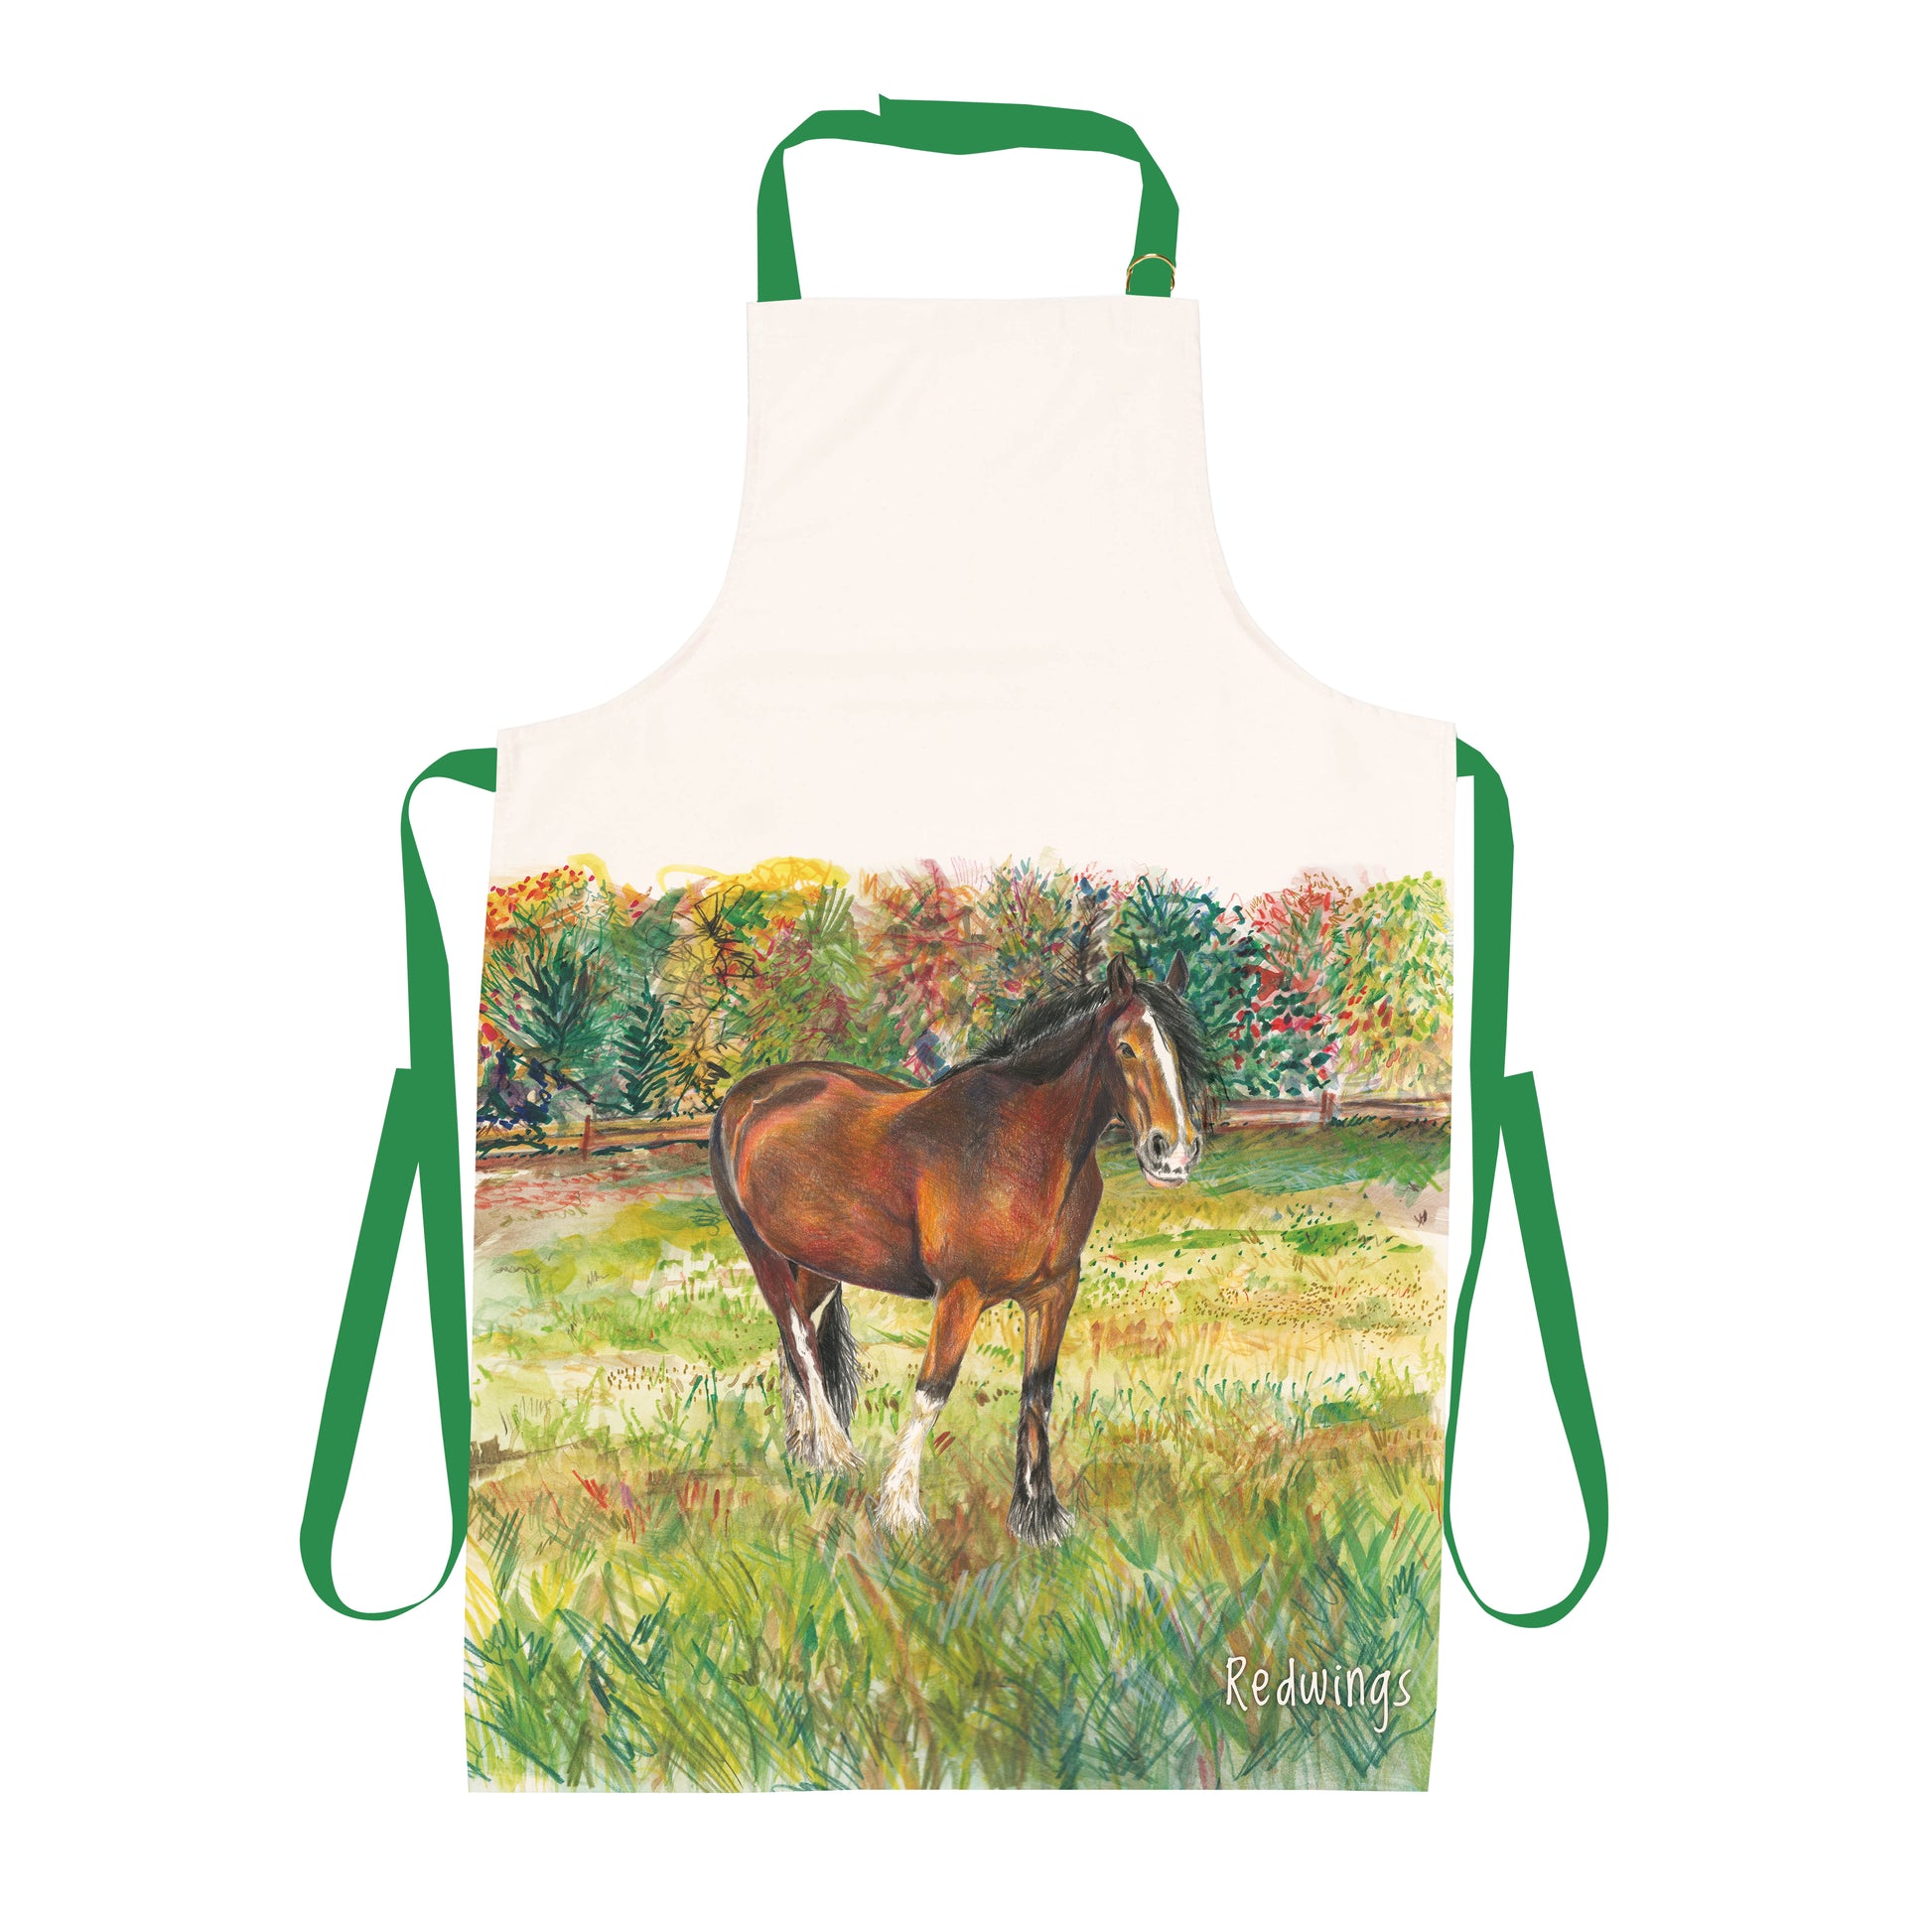 Image shows a cream apron with a beautiful illustration of our shire horse Lady standing in a very green field with different shades of greens throughout the grass and trees